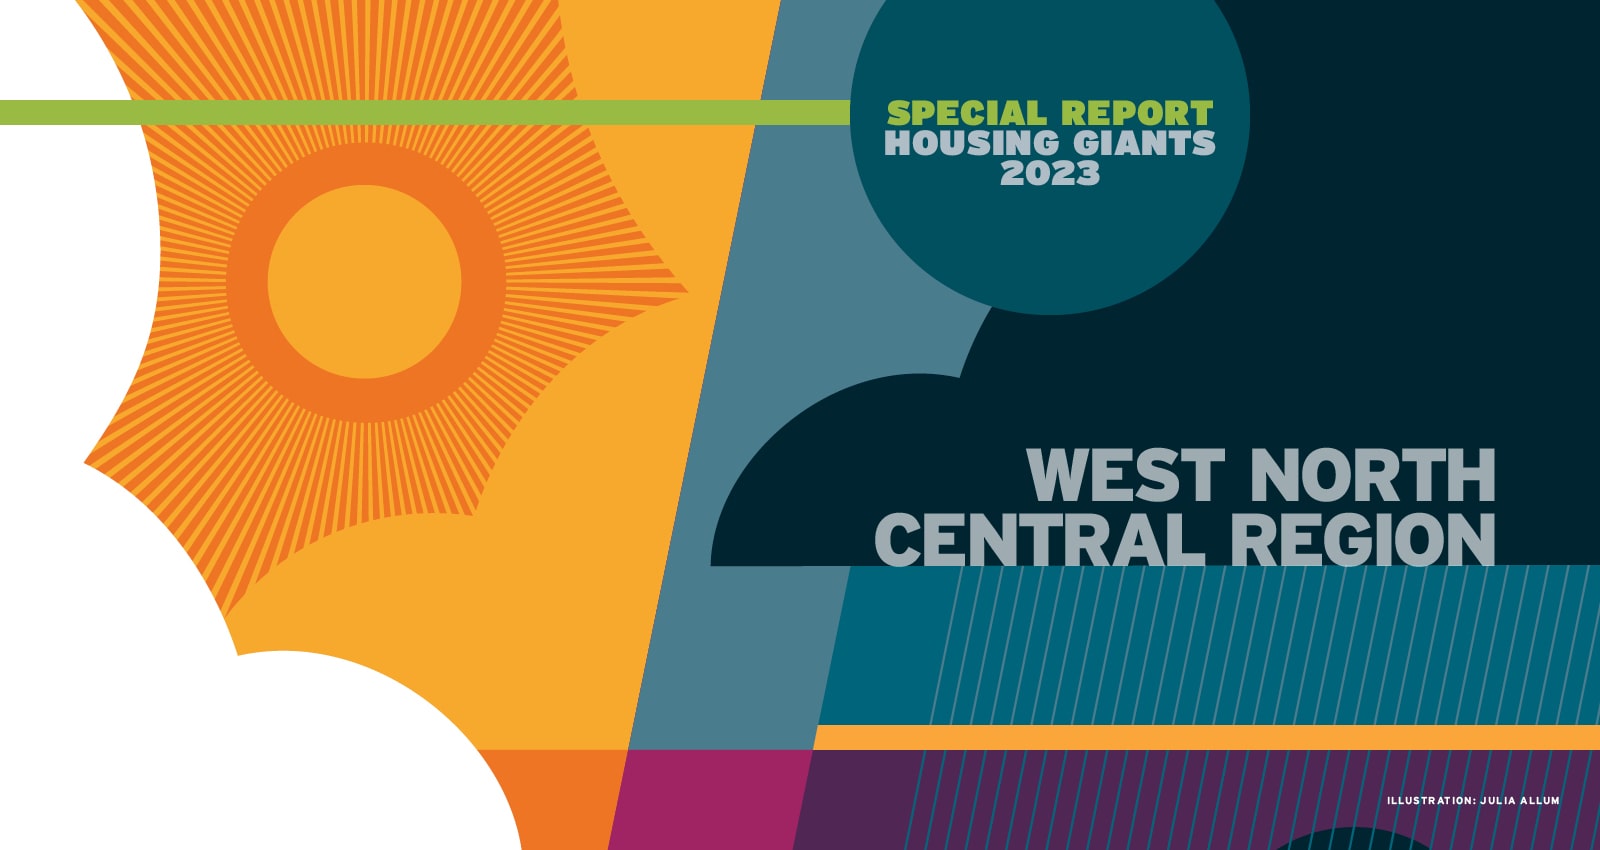 2023 Housing Giants ranked list of top builders in the West North Central region